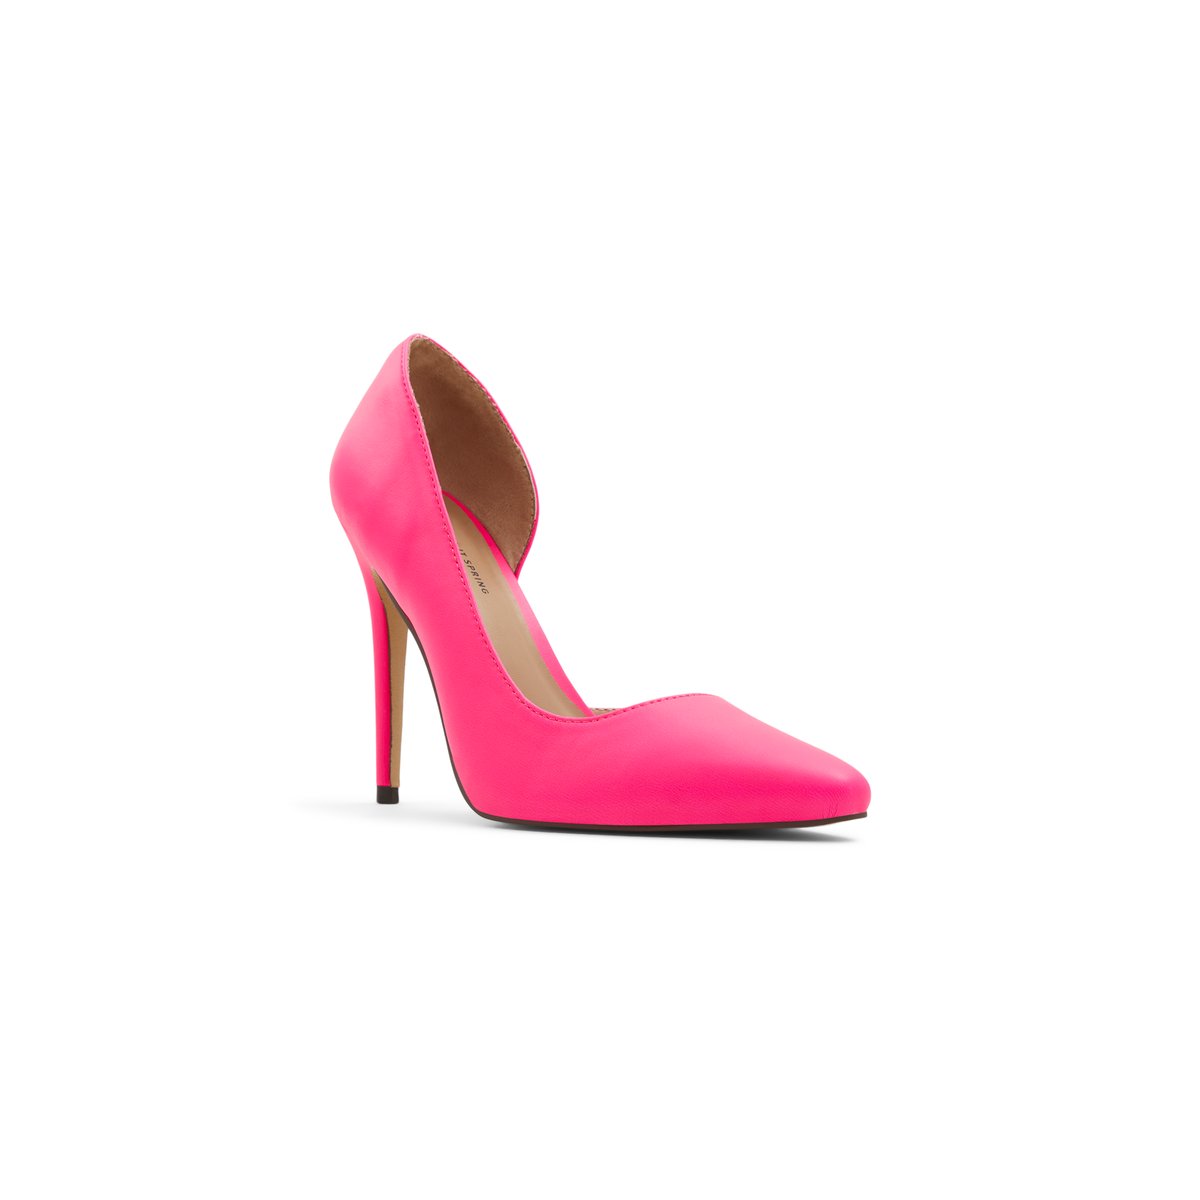 Byvia Women Shoes - Bright Pink - CALL IT SPRING KSA